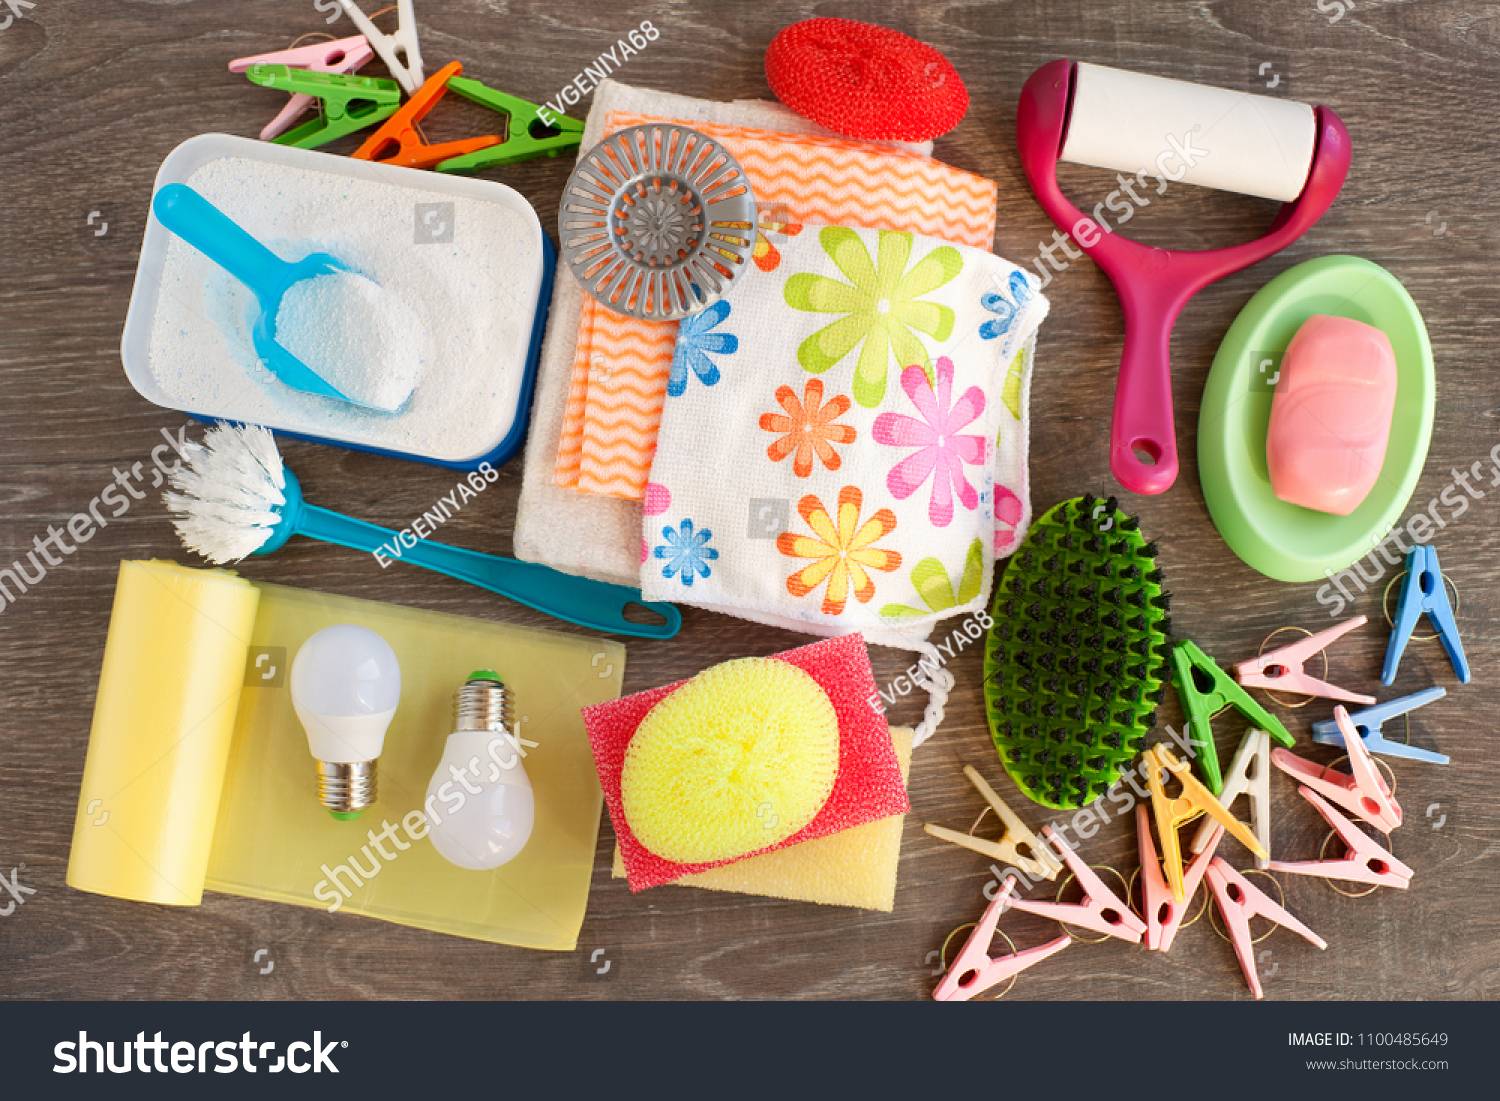 Household items of various kinds. View from above. Washing powder, garbage bags, LED lamp, clothes roller, soap and clothespins are household utensils. Household items for cleanliness in the house. #1100485649